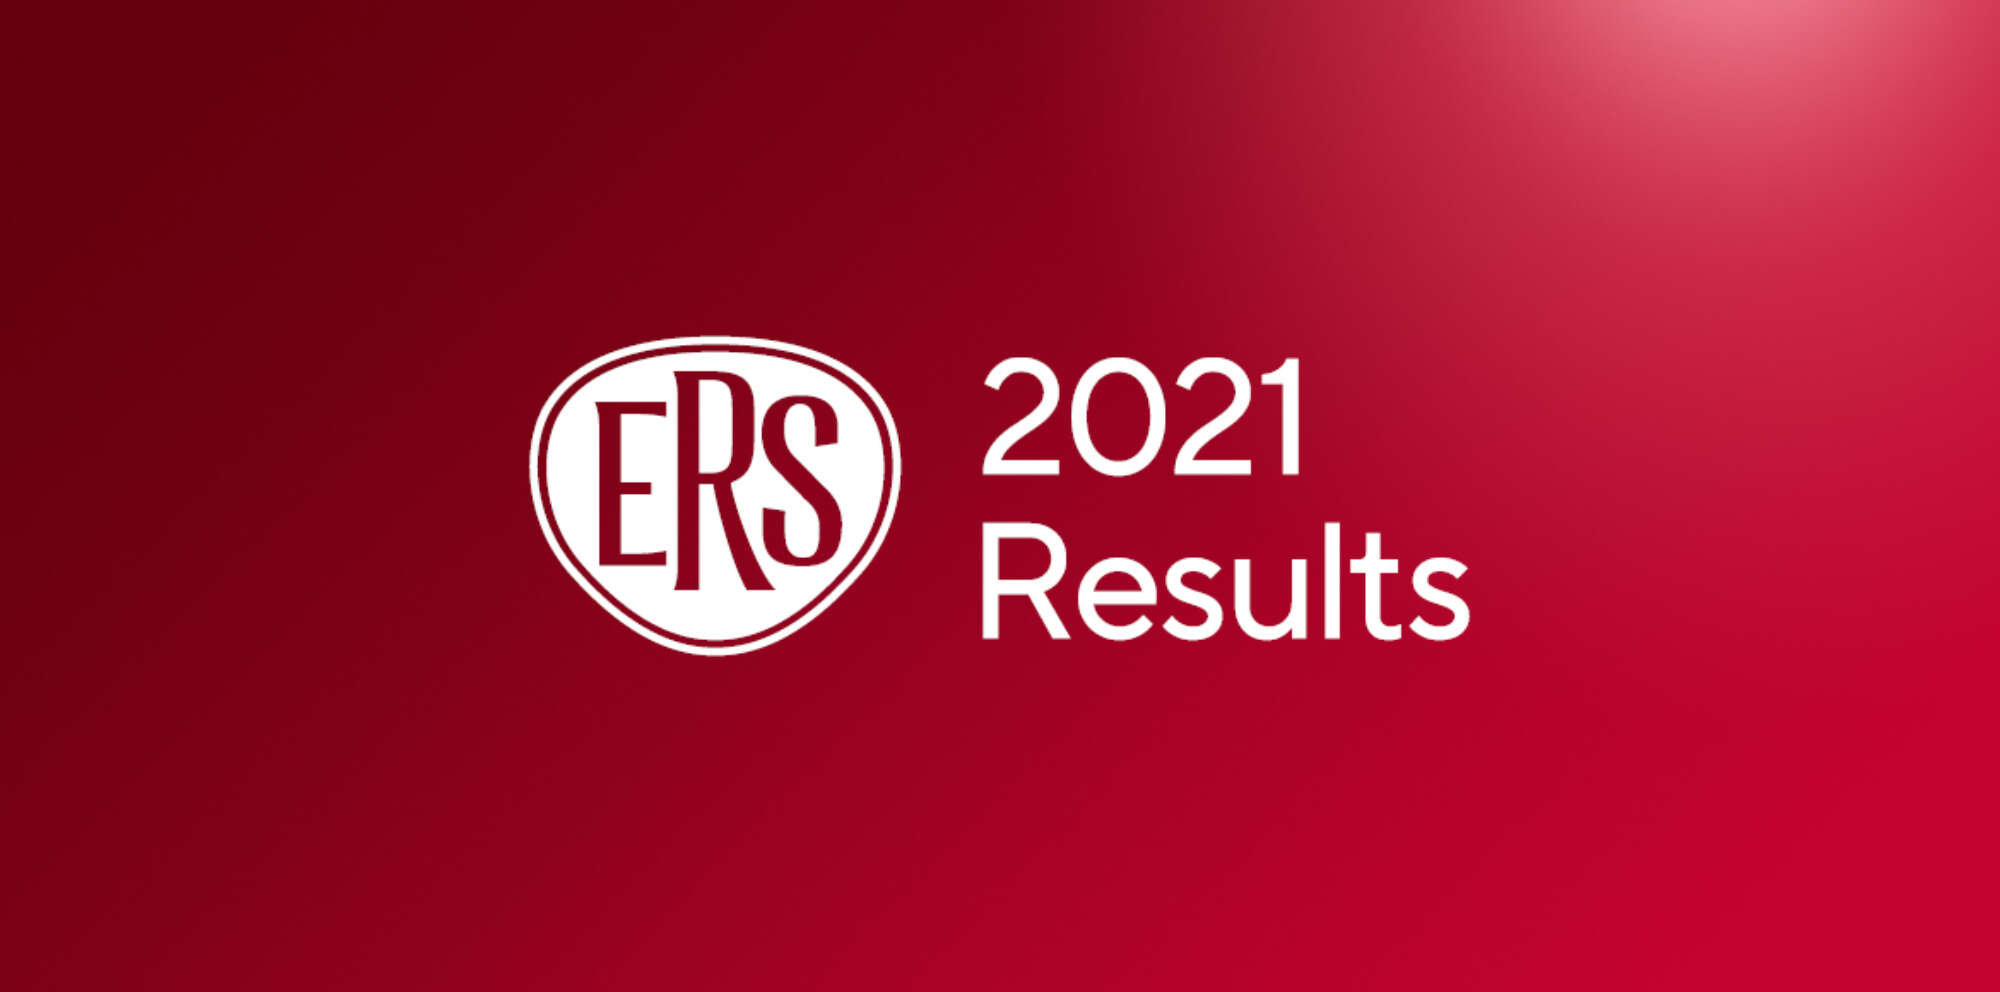 Ers 2021 results